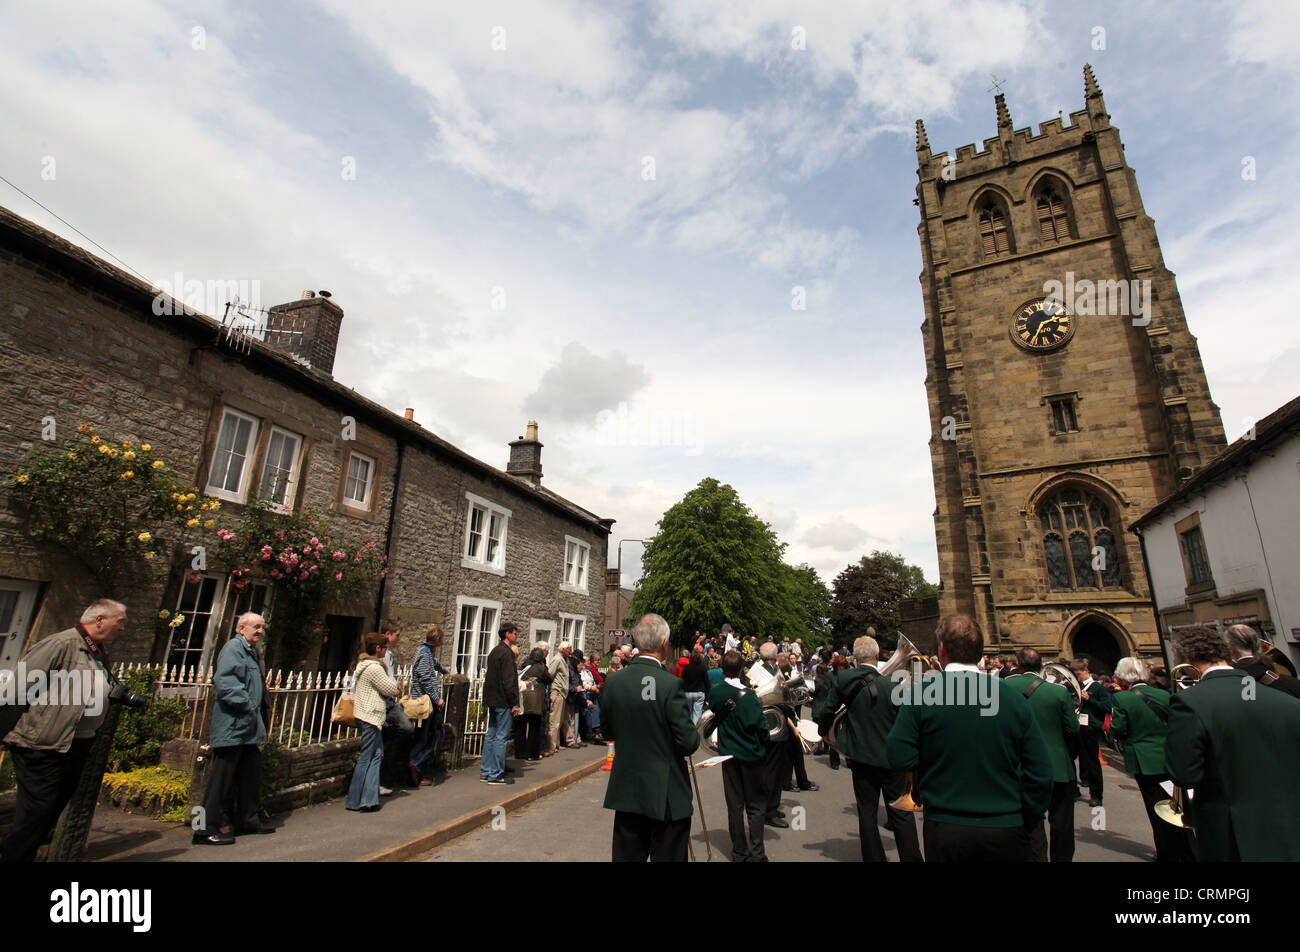 The Village Band Marching Through the Derbyshire Village of Youlgreave for the Blessing of the Well Dressings Stock Photo